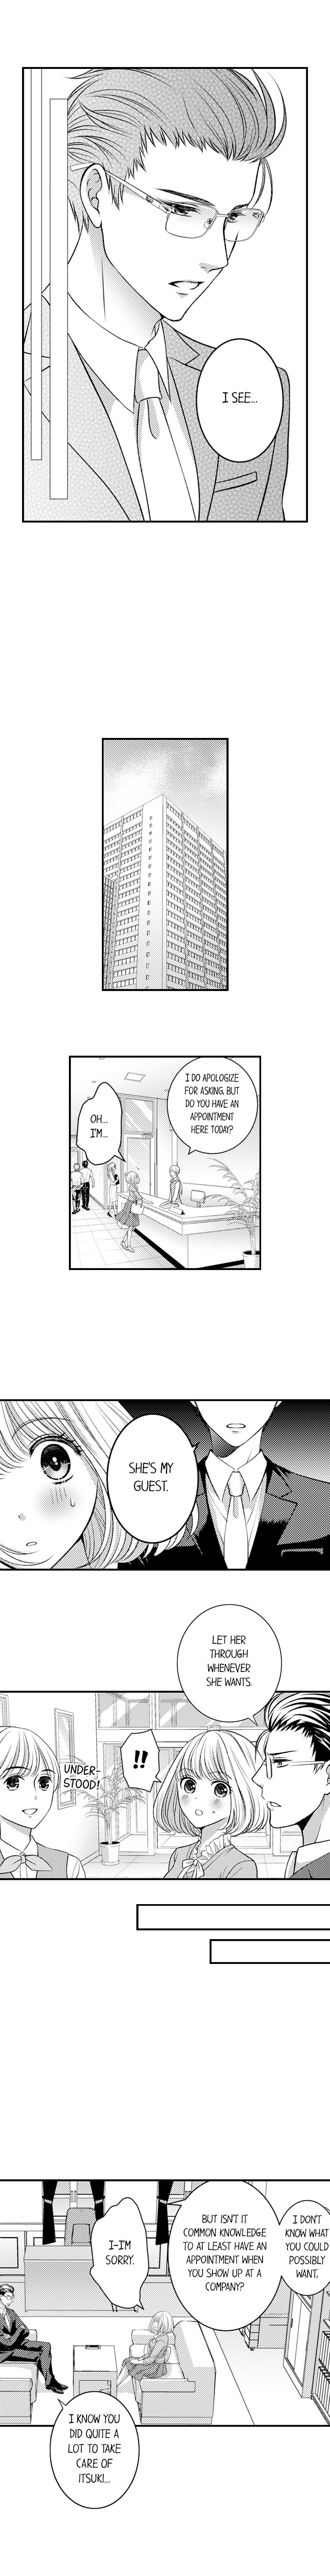 He Took My Adult Toy - "I'll Teach You How to Use It" Ch.82